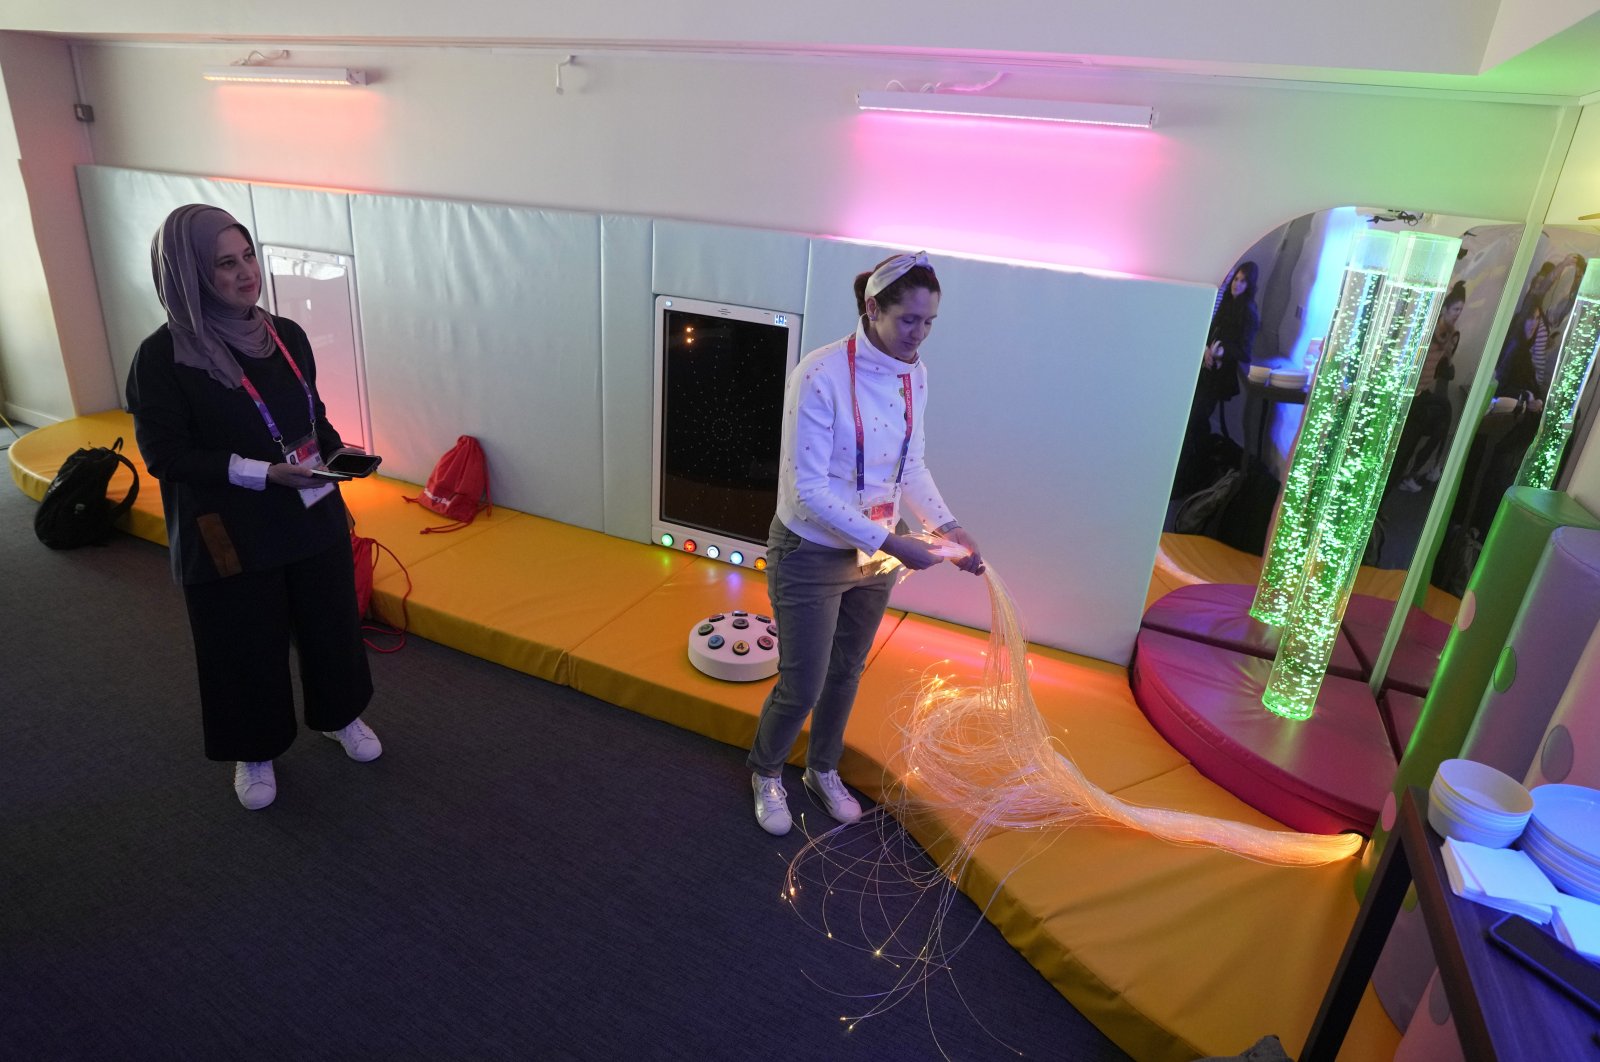 Raana Smith, left and Alison Saraf co-founders of Sensory Souk, carry out a demonstration of a sensory room at the Lusail Stadium in Lusail, Qatar, Saturday, Dec. 10, 2022. (AP Photo)